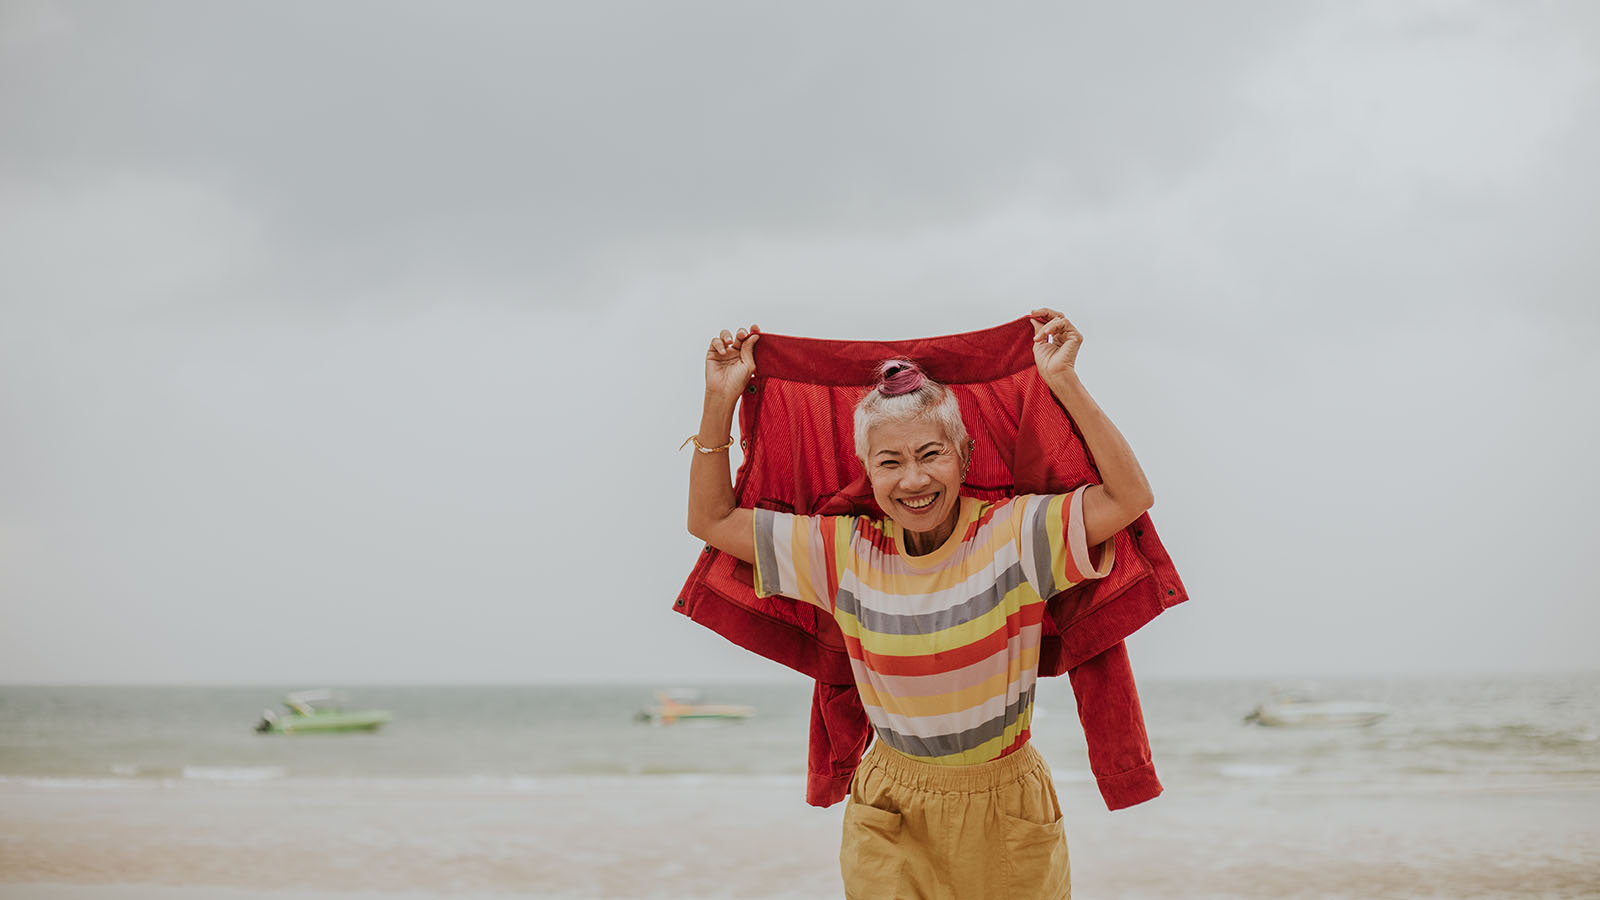 Older woman enjoying the beach on a cloudy day